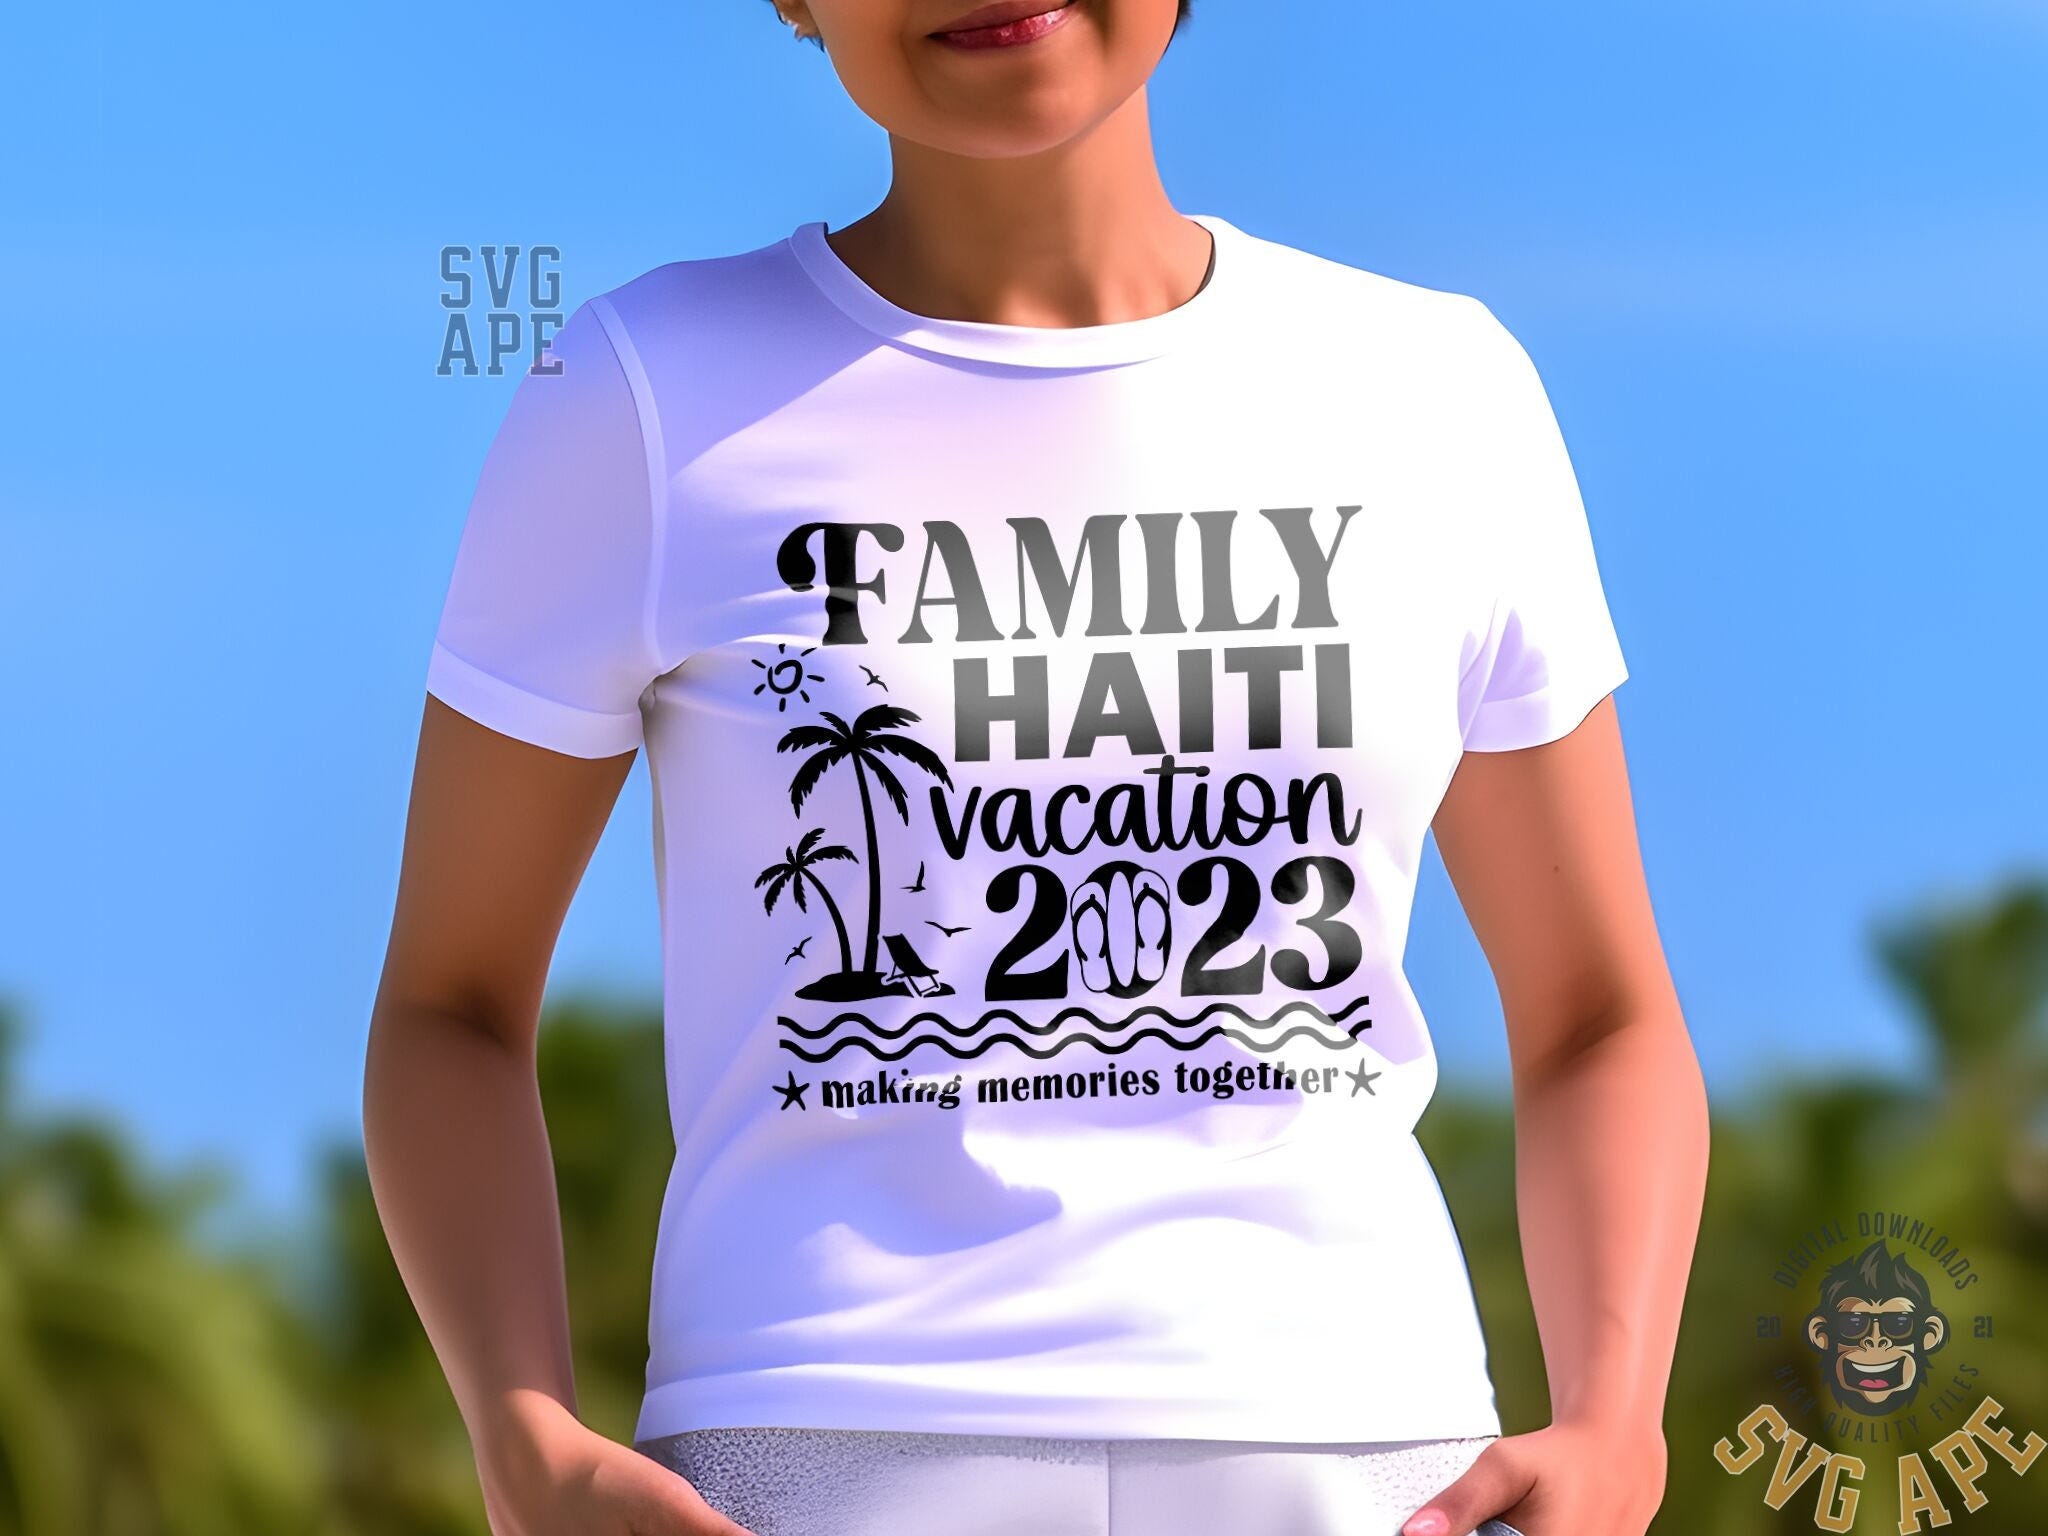 Family Haiti Vacation 2023 Making Memories Together SVG PNG, License Plate Svg, Straight Trippin Svg, Road Trip Svg, Family Cruise Svg